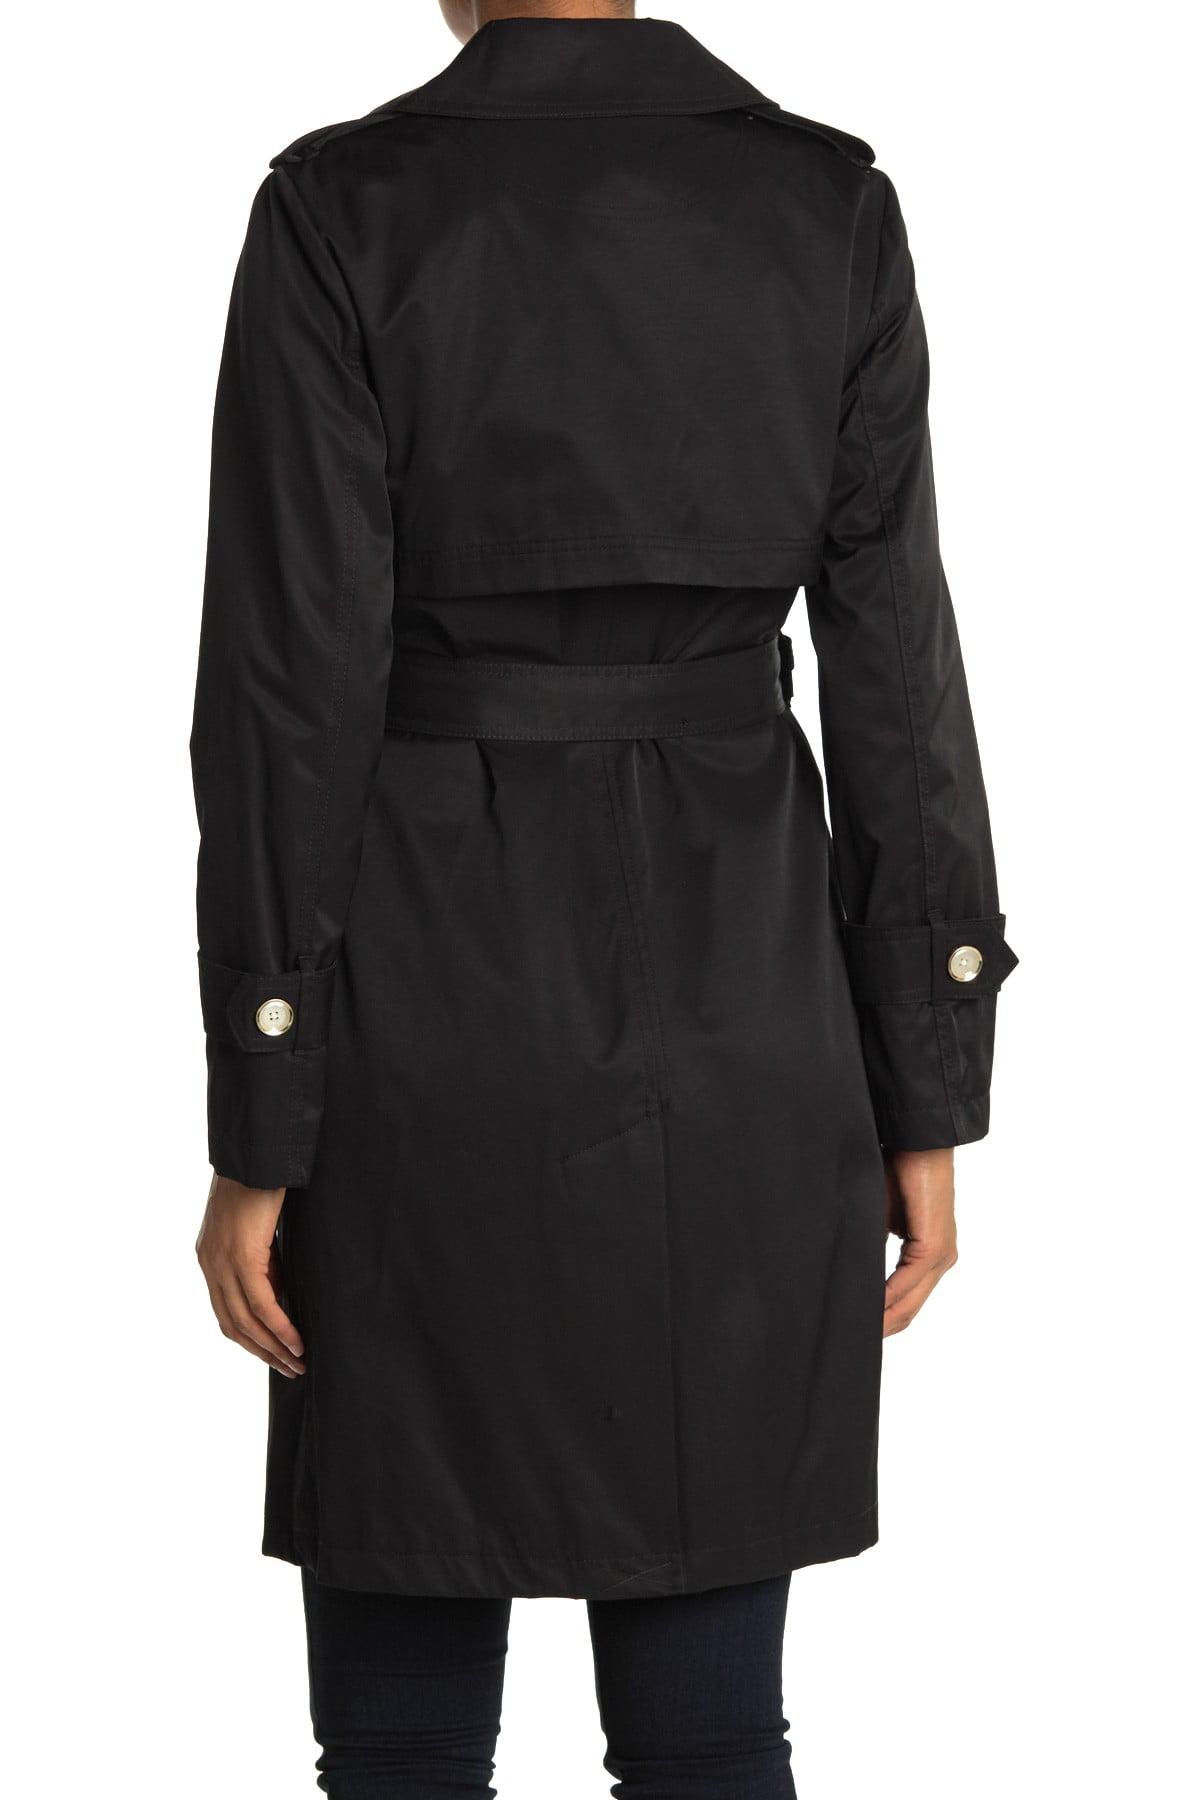 Karl Lagerfeld Cotton Double Breasted Belted Trench Coat in Black - Lyst